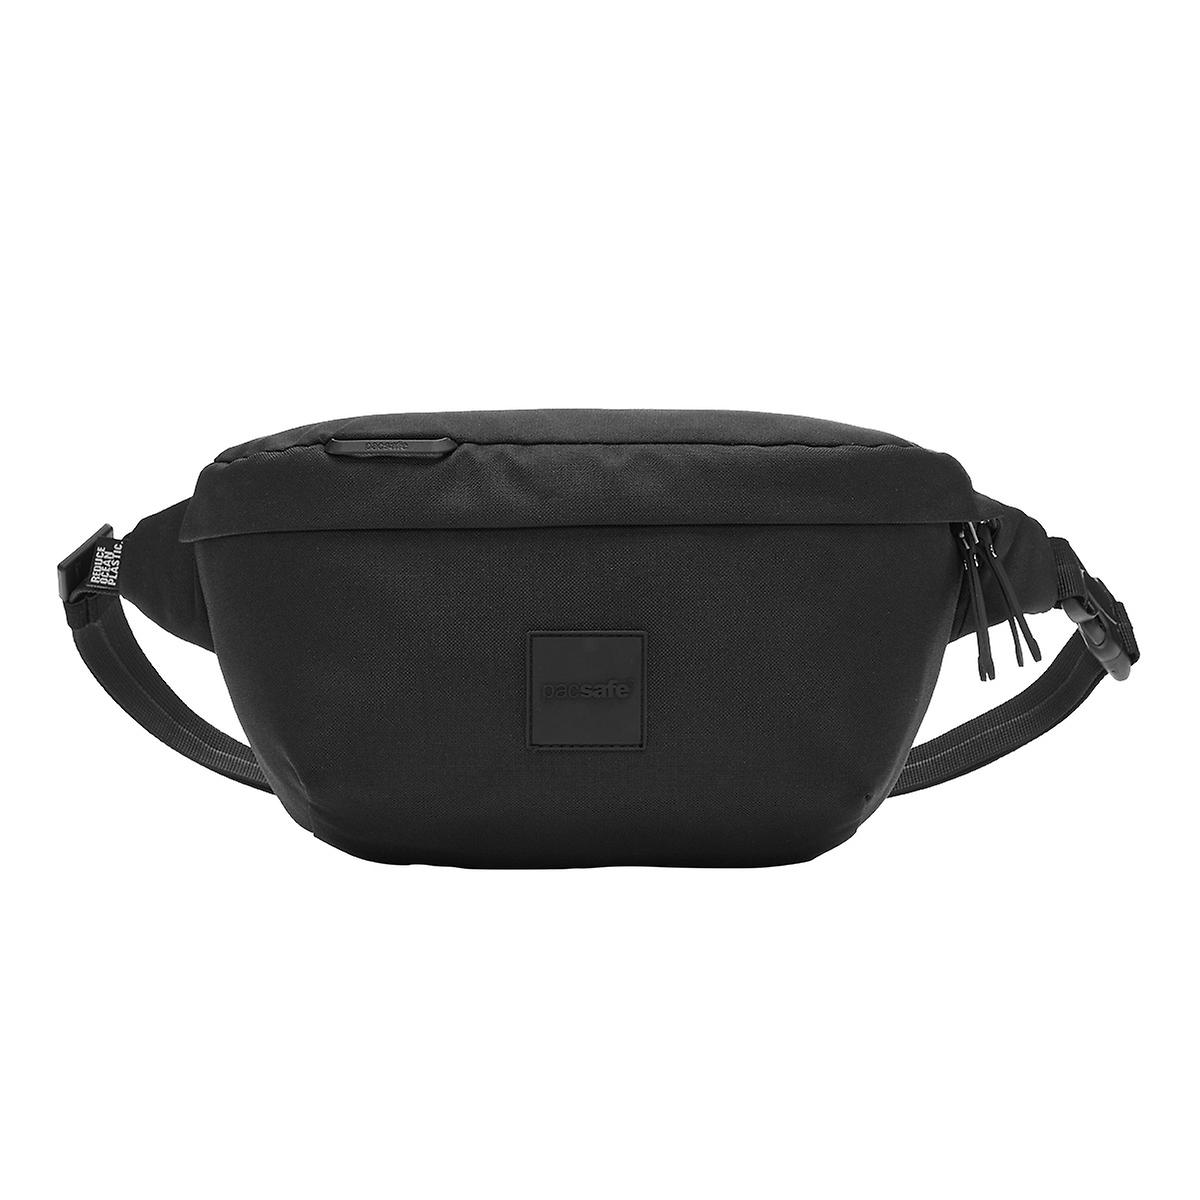 Pacsafe Black Go Sling Pack | The Container Store